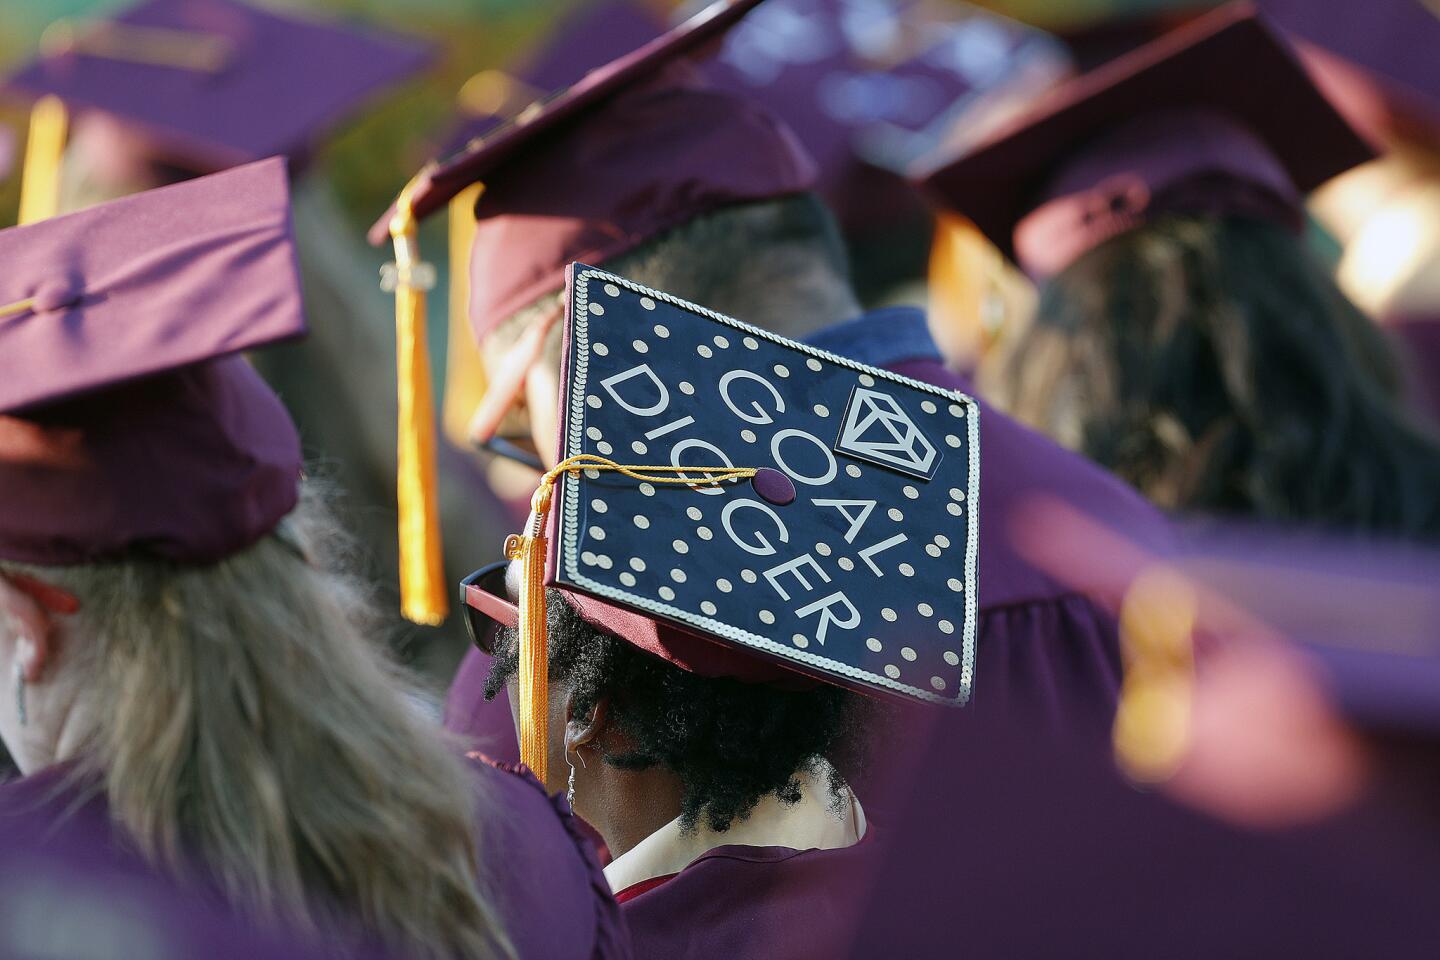 Photo Gallery: Glendale Community College 2019 commencement